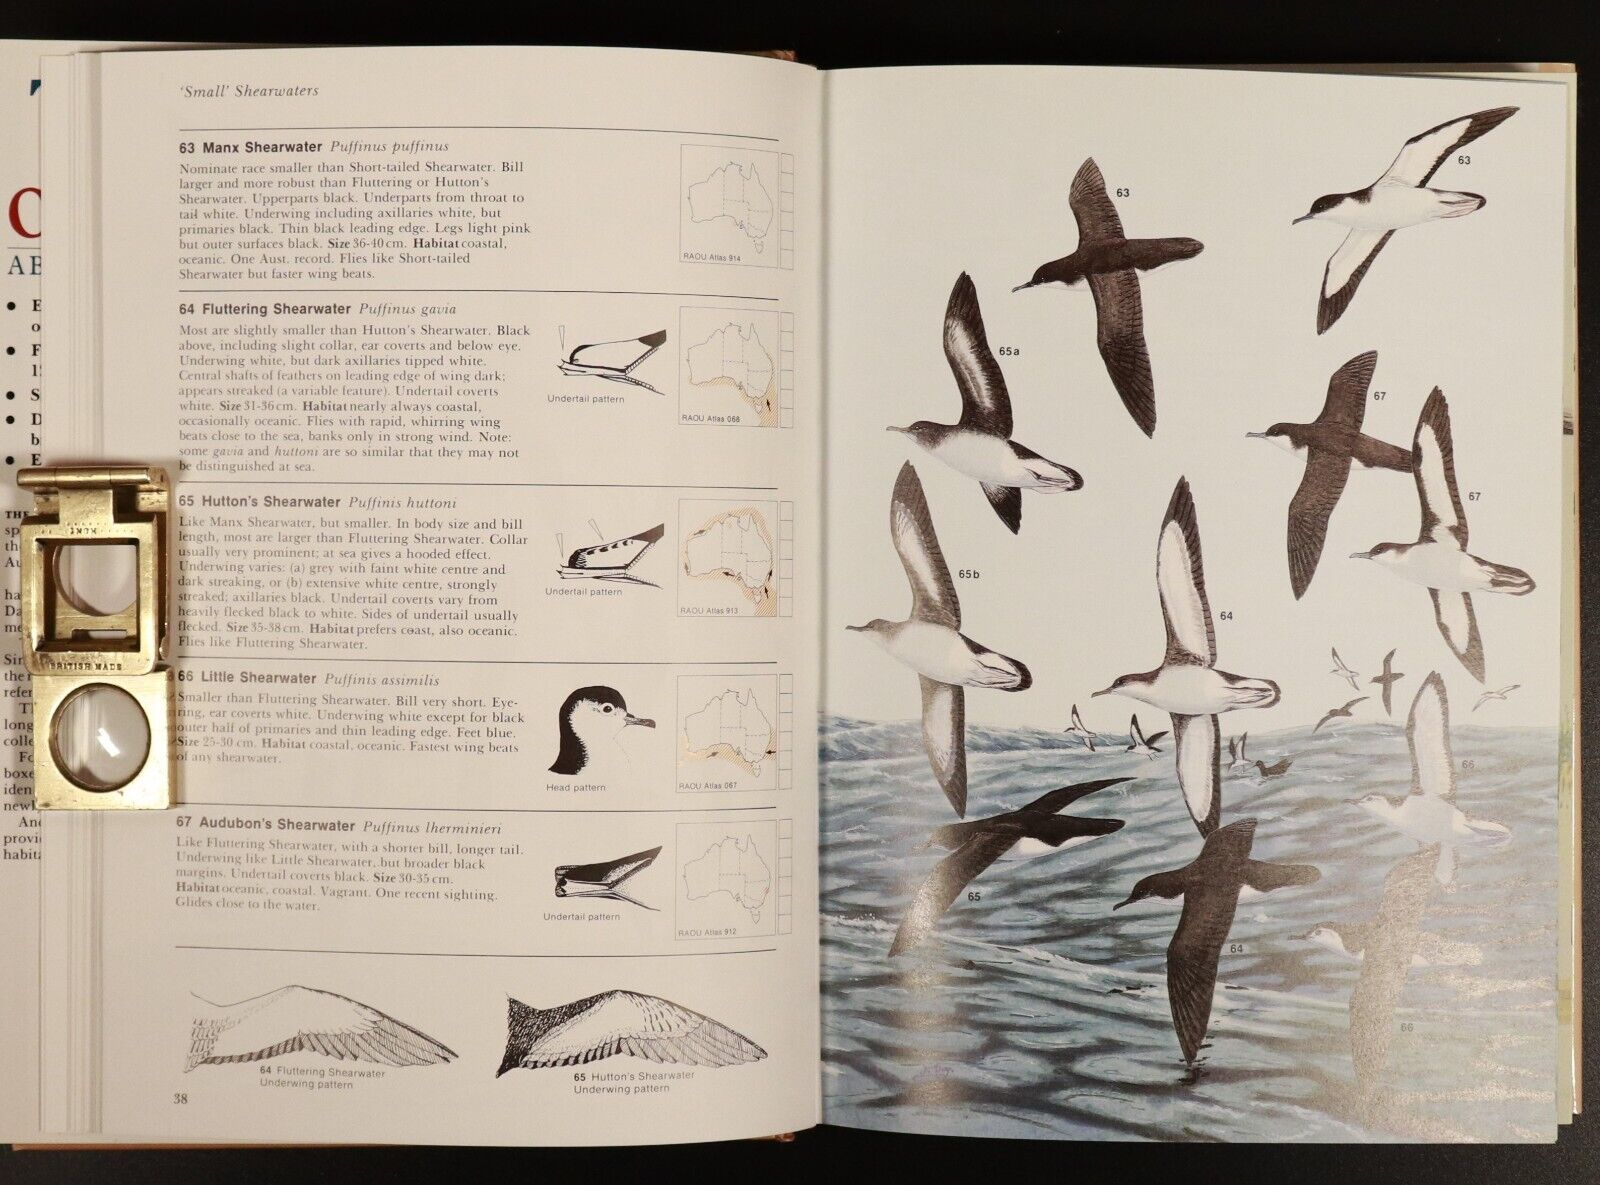 1986 Birds Of Australia by Ken Simpson Illustrated Wildlife Reference Book